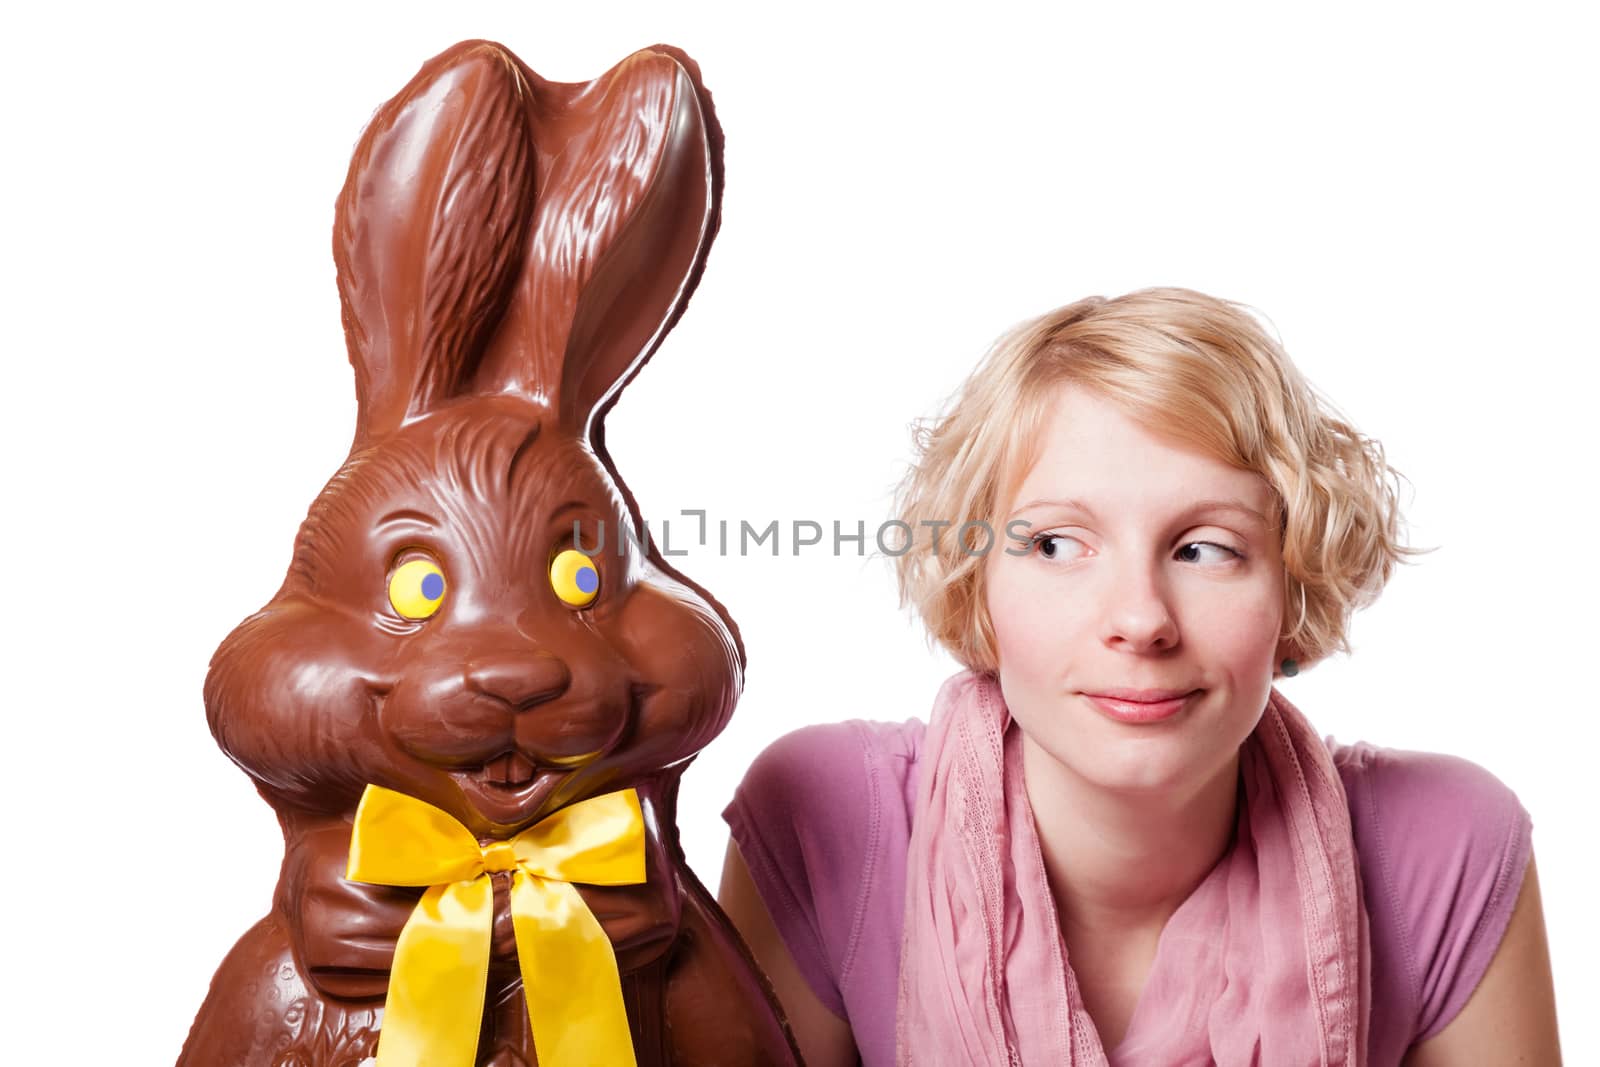 Chocolate Easter Bunny and a Blond Girl Looking at each other. Isolated Over White